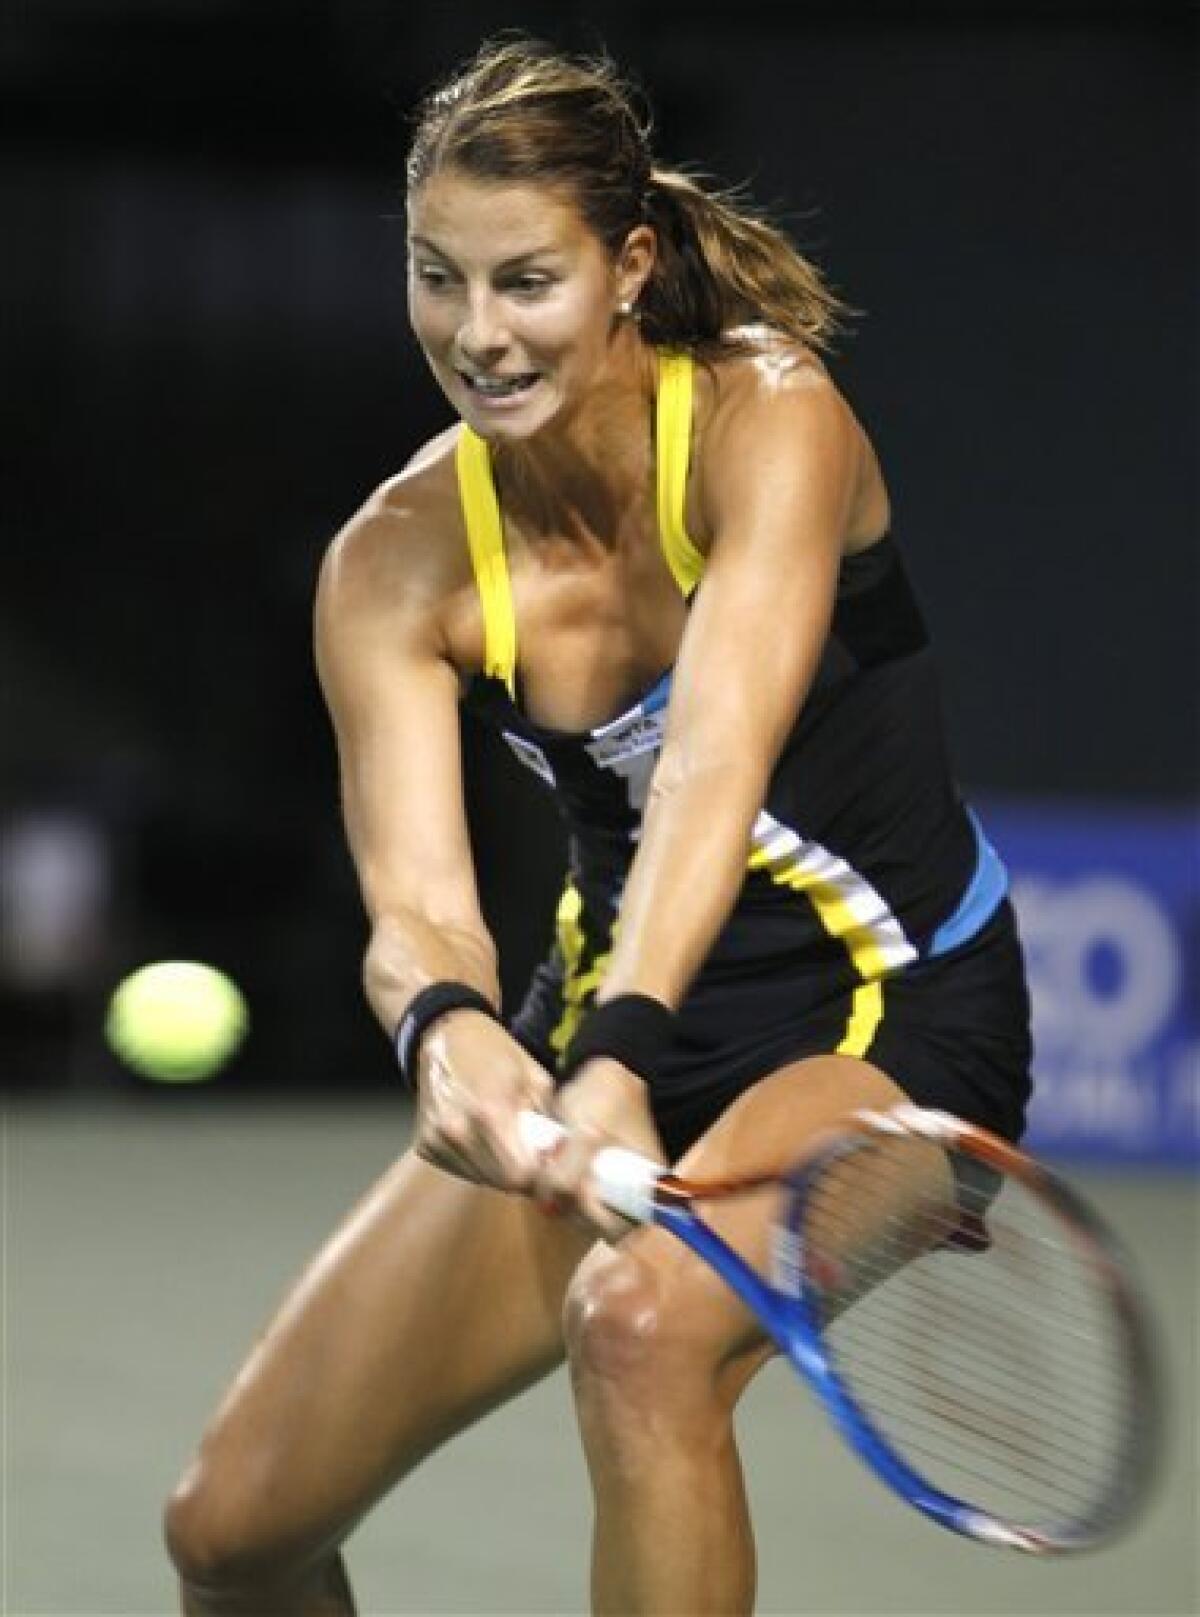 Mandy Minella of Luxembourg returns a ball to Kimiko Date-Krumm of Japan during their first round match of the Japan Pan Pacific Open tennis tournament in Tokyo, Monday, Sept. 26, 2011. Minella won 1-6, 6-3, 6-3.(AP Photo/Shizuo Kambayashi)